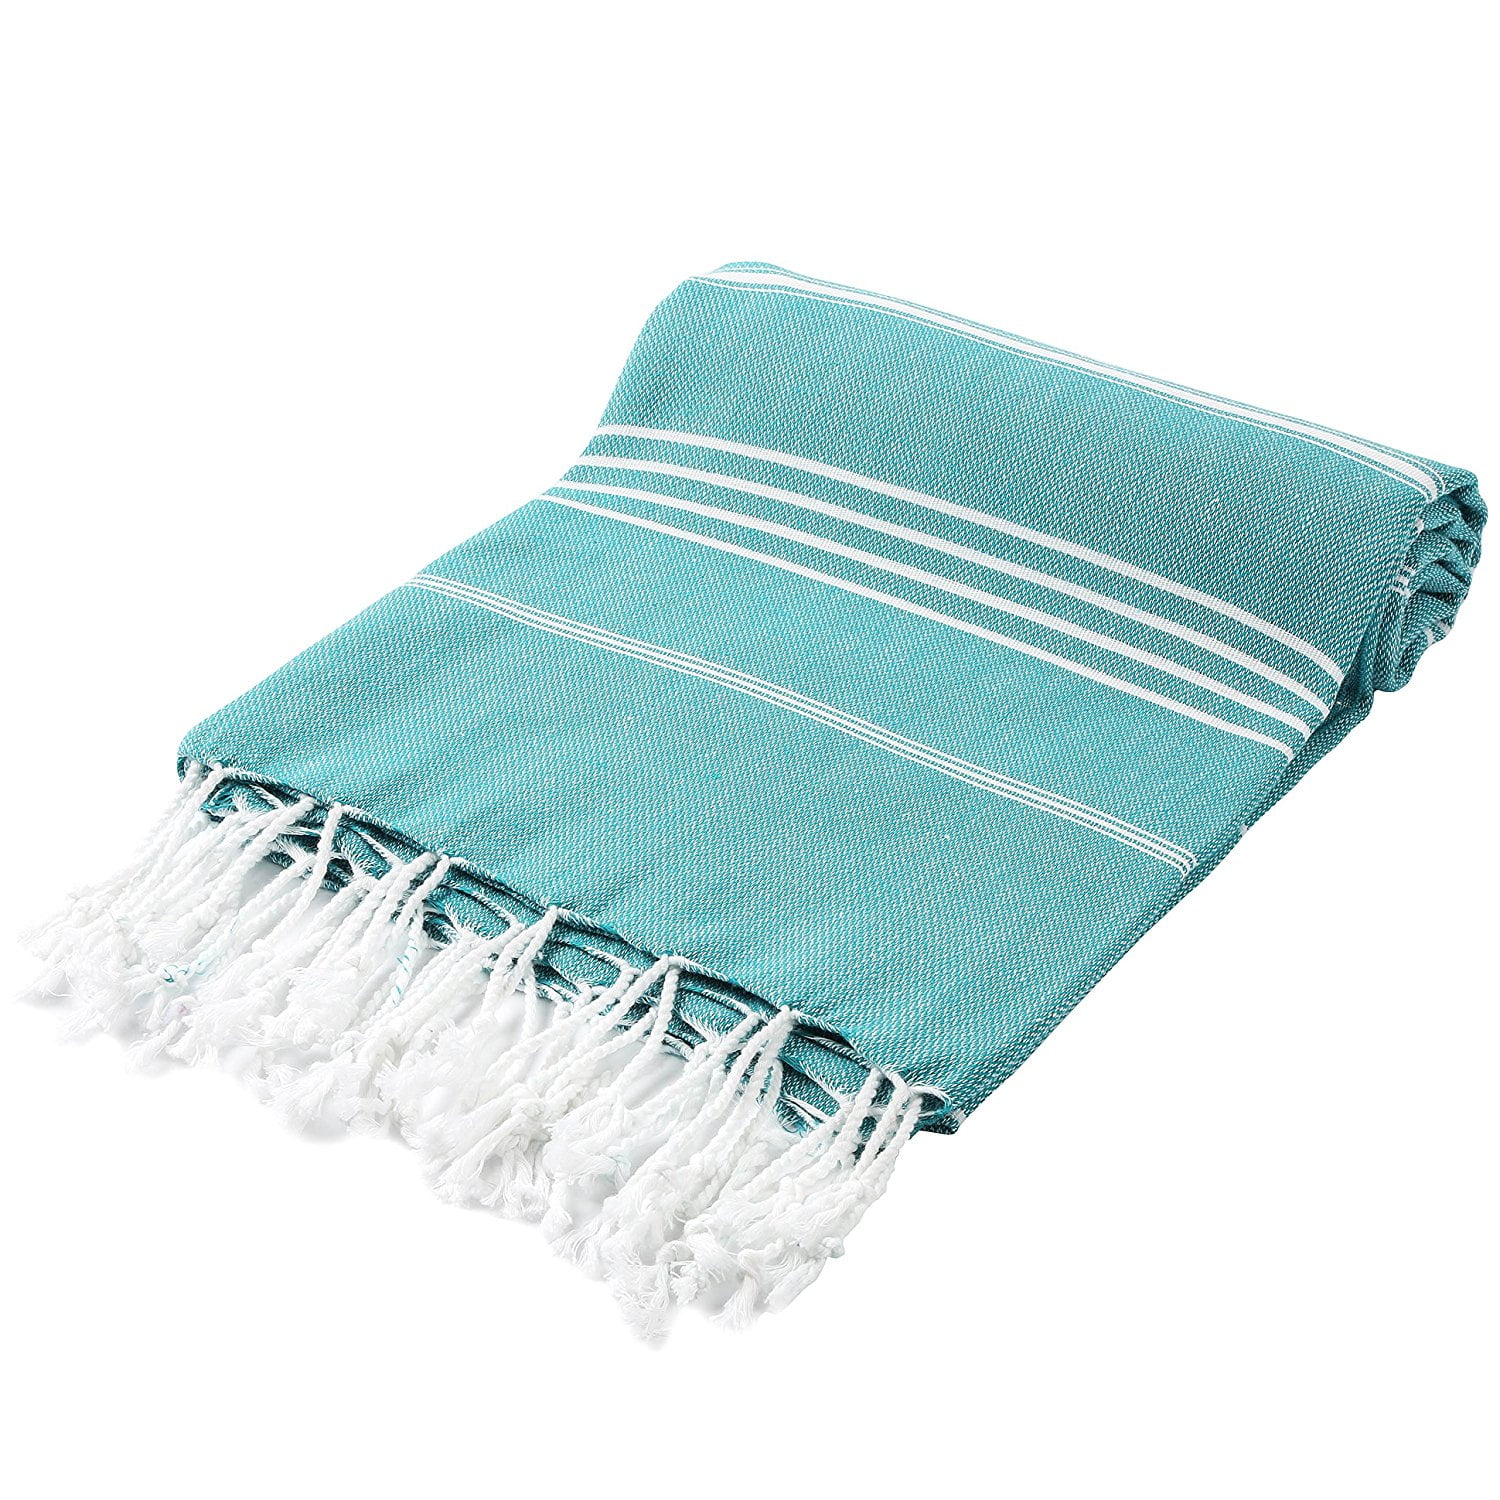 Cacala Turkish Bath Towels Large Luxury Beach Towel Highly Absorbent Quick Dry Soft and Comfortable Shower Towels for Bathroom 37 x 70 Camel Pool 100% Cotton Pure Series Spa